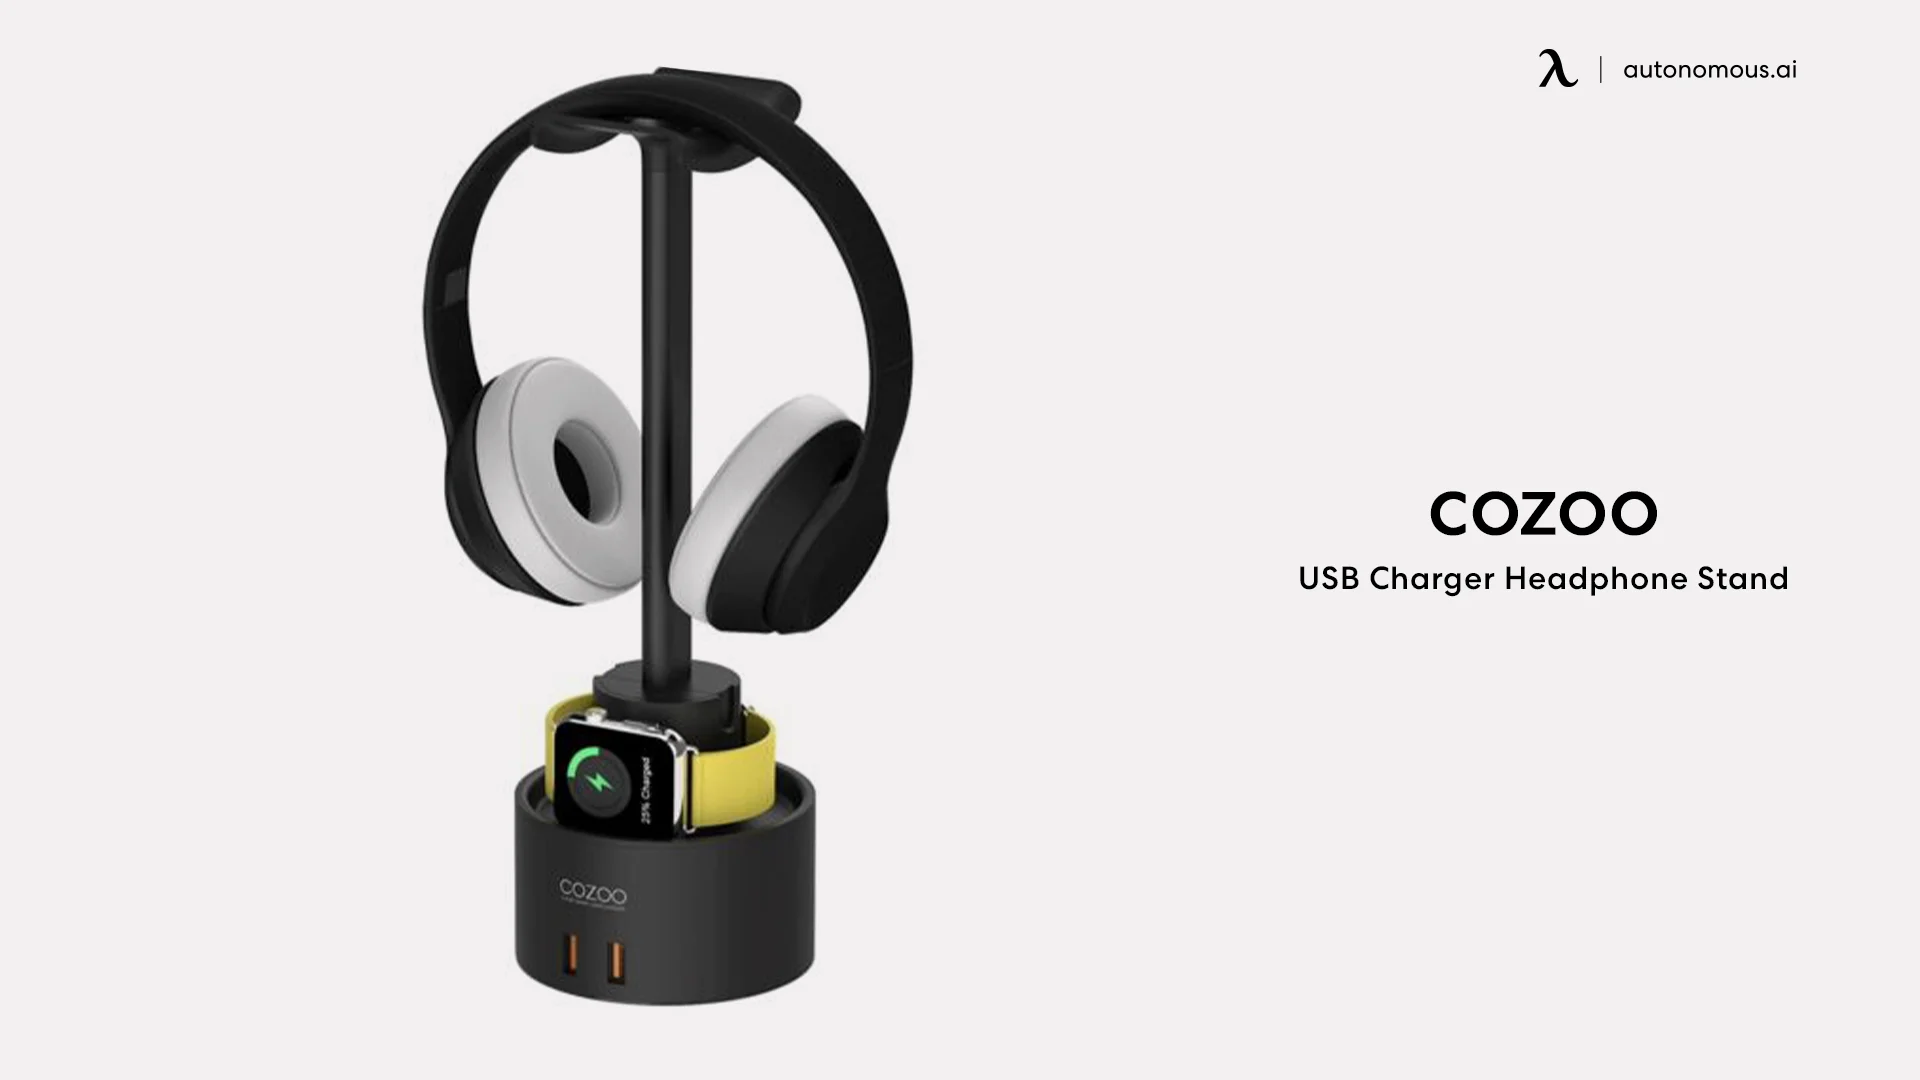 USB Charger Headphone Stand by Cozoo